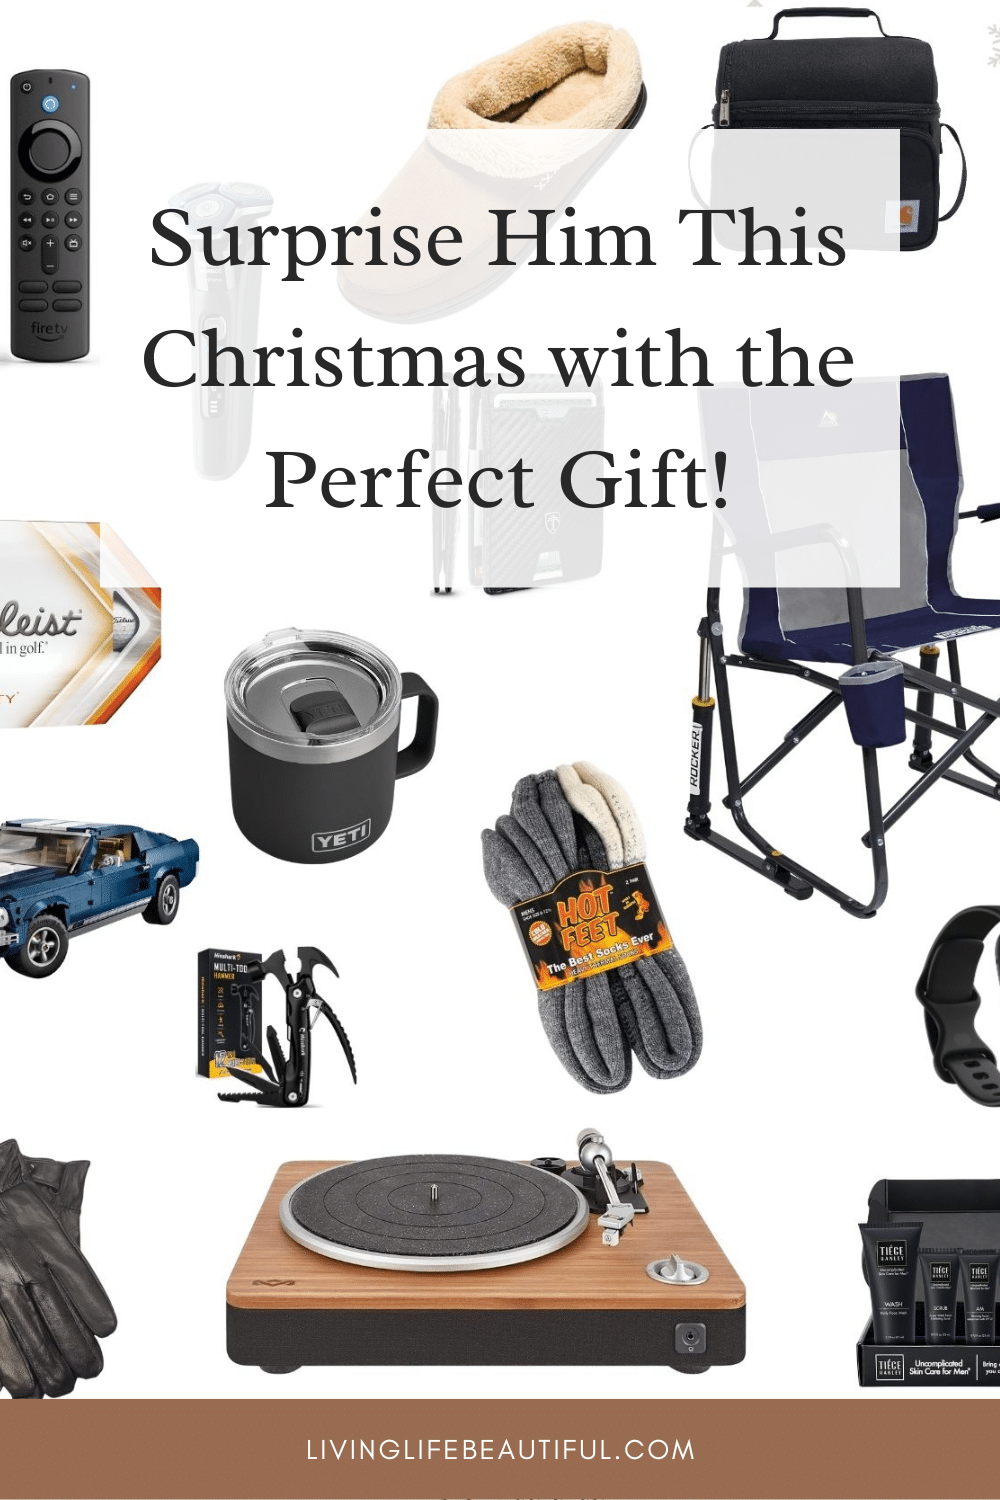 Surprise Him this Christmas with the Perfect Gift